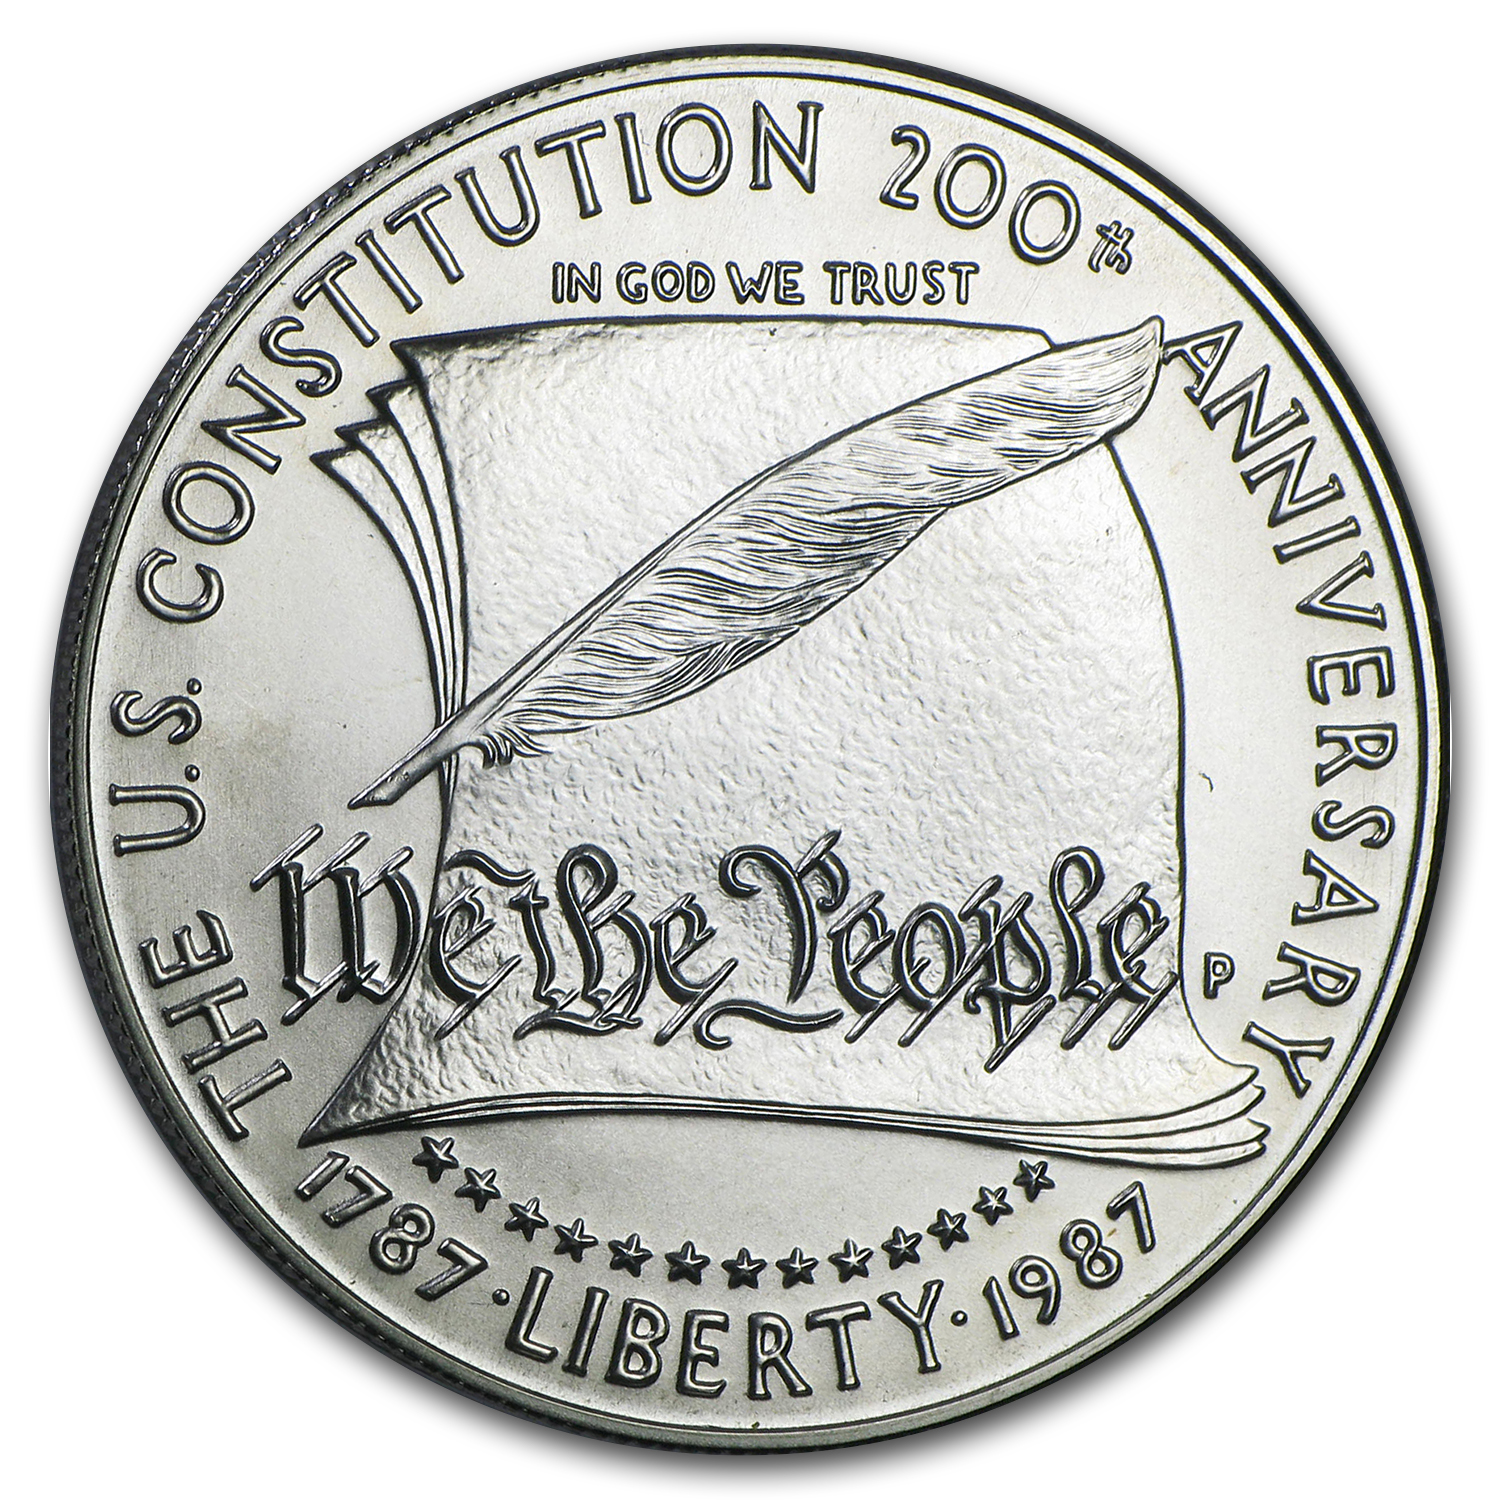 1987 S United States Constitution $1 Proof Silver Dollar Coin w/ COA & Box 1 